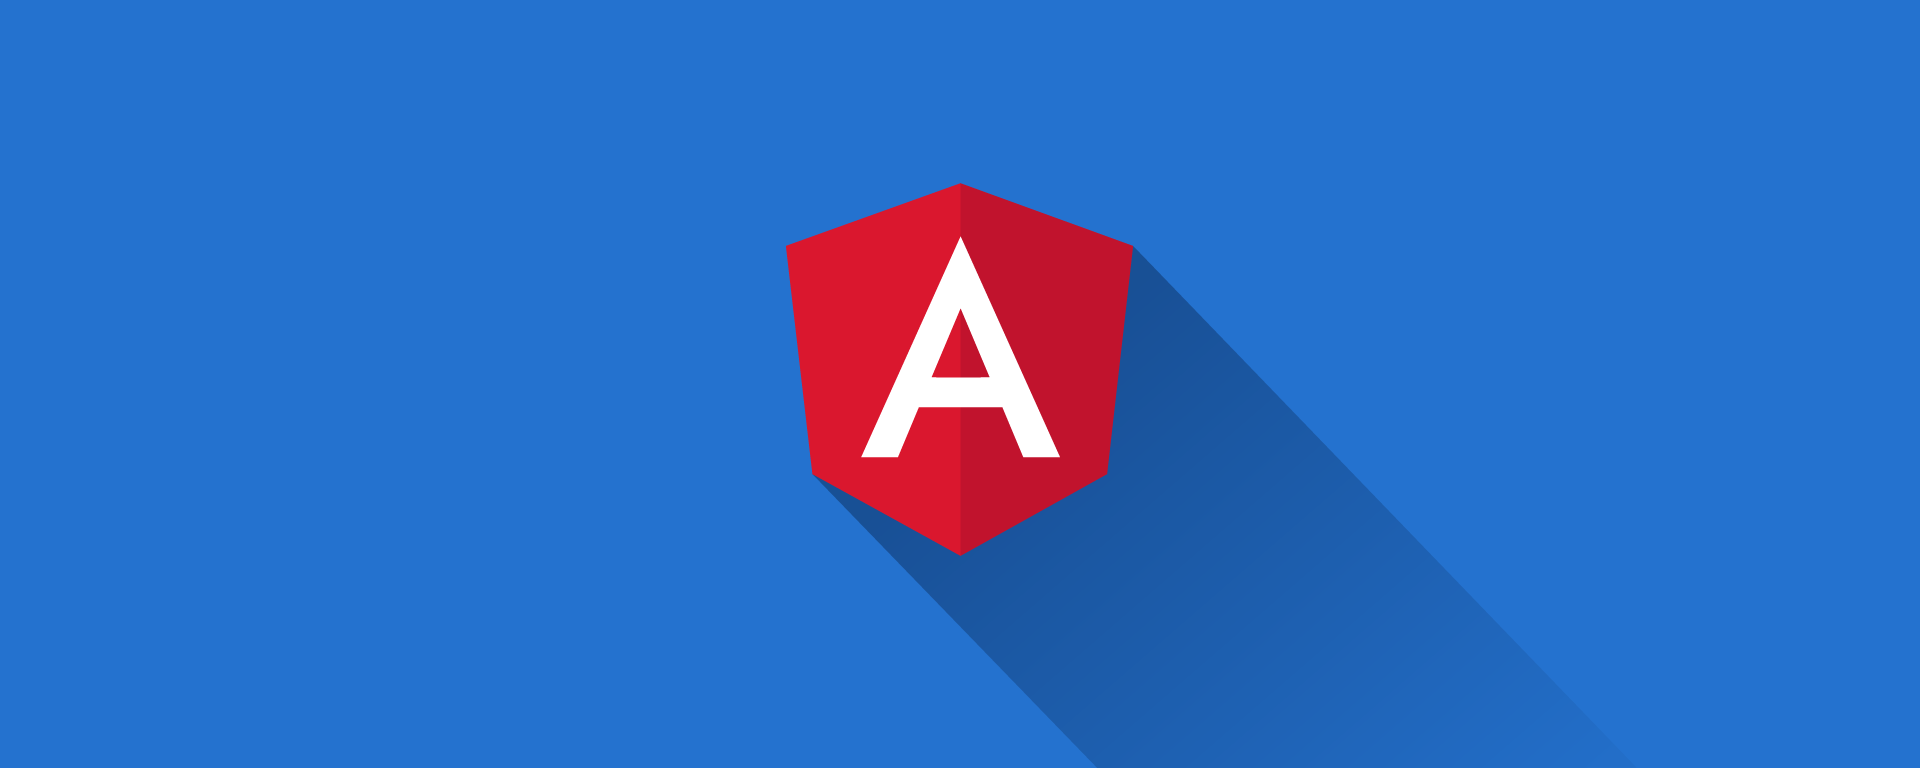 Developing Angular Applications with Docker Containers